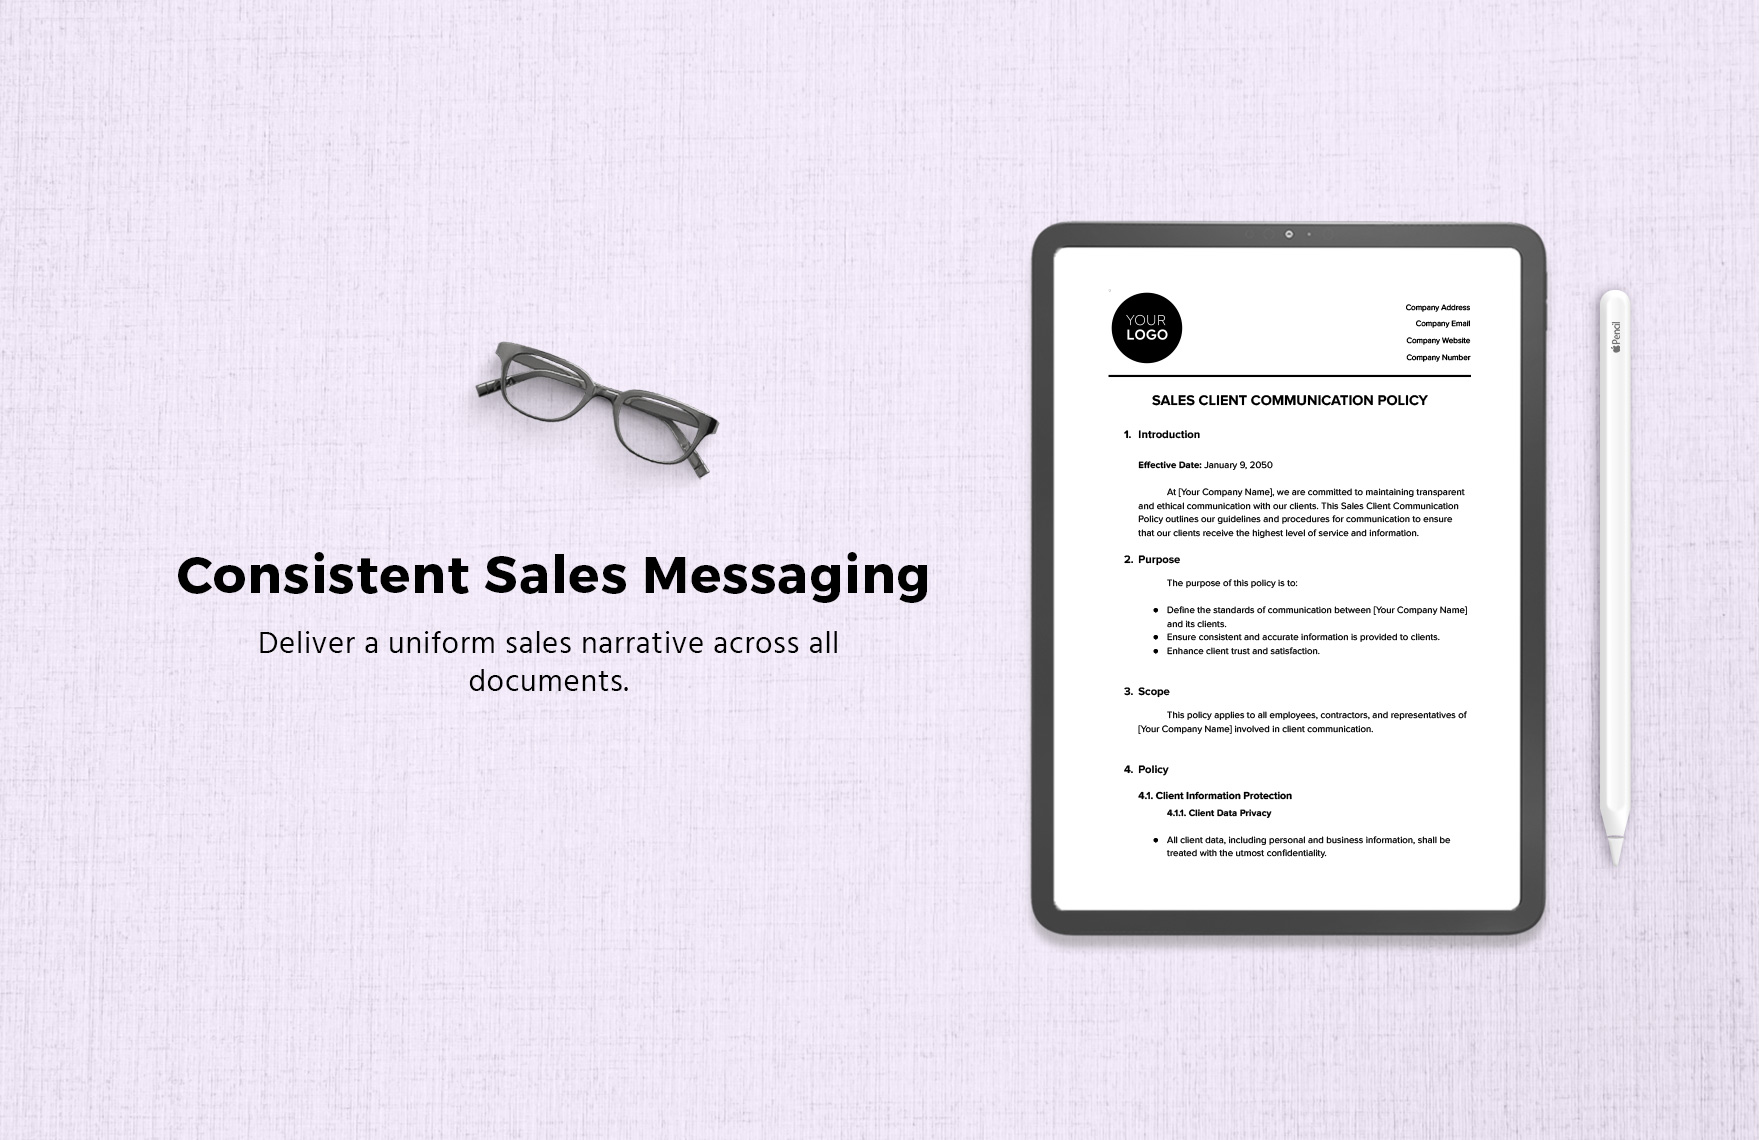 Sales Client Communication Policy Template